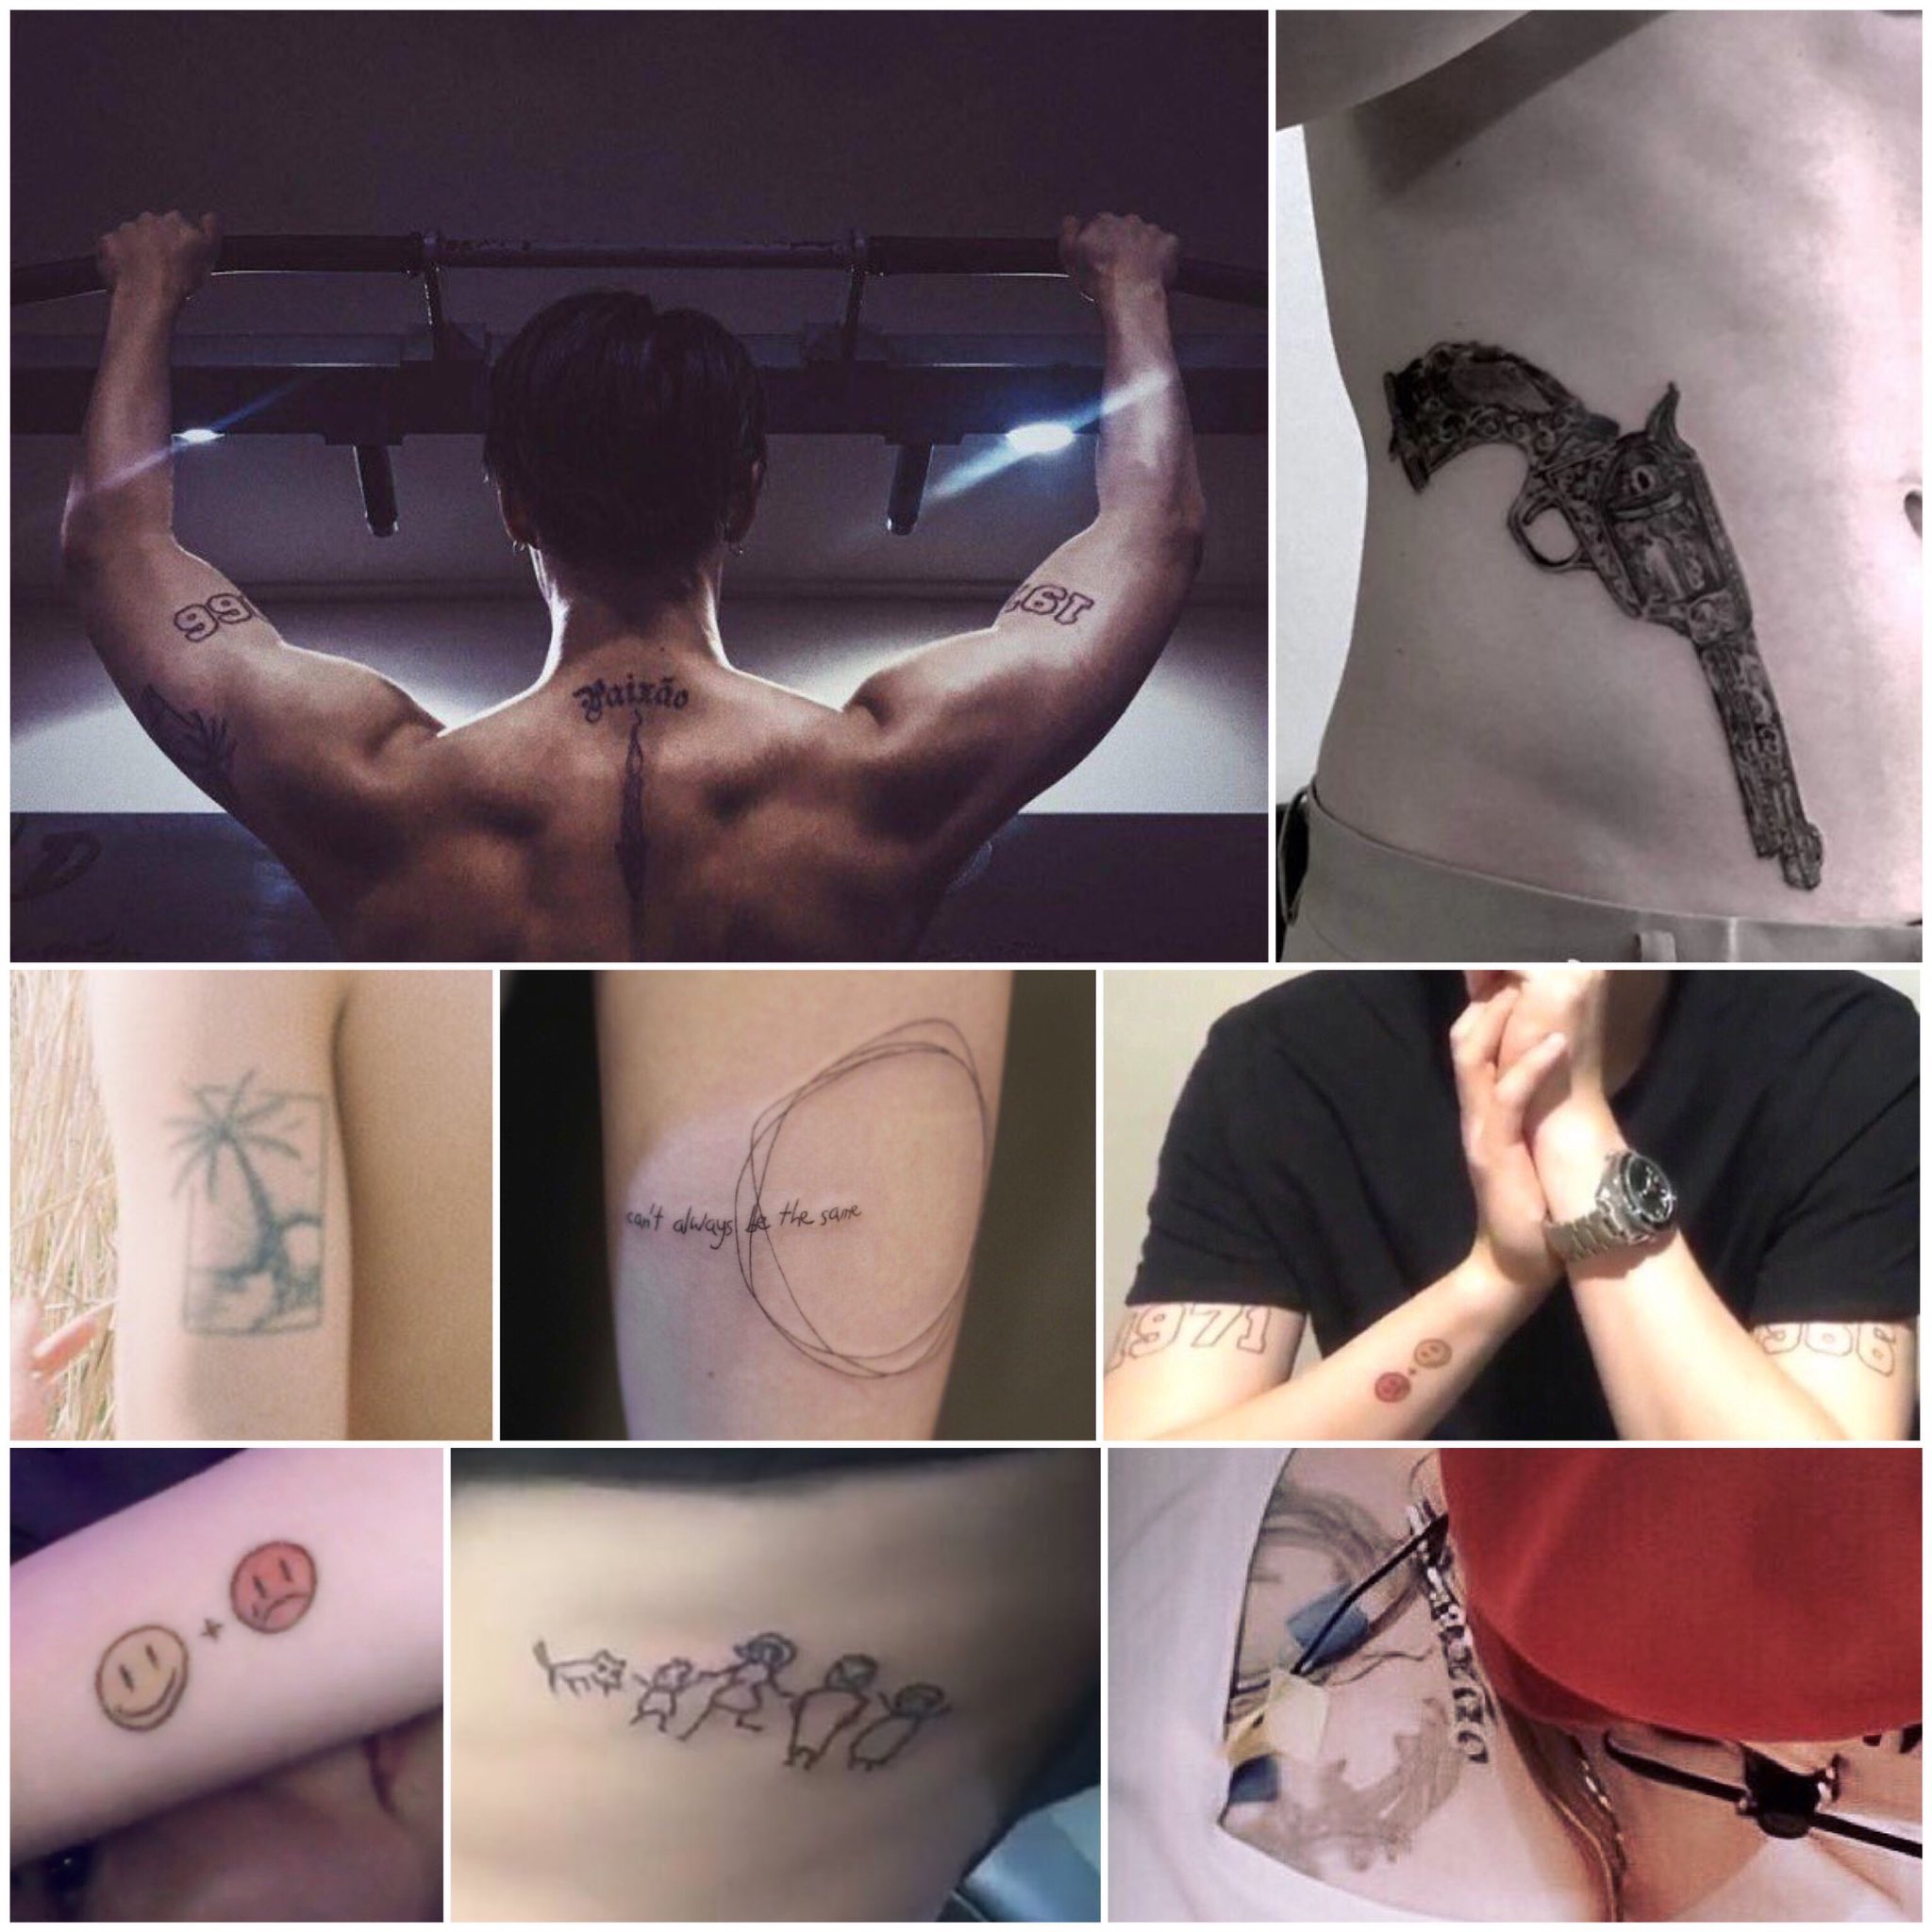 Ciel Cho Seungyoun Tattoo Meaning Already Understood It Can T Always Be The Same Tattoos Parents Year Of Birth Paixao And Candle Burning Passion